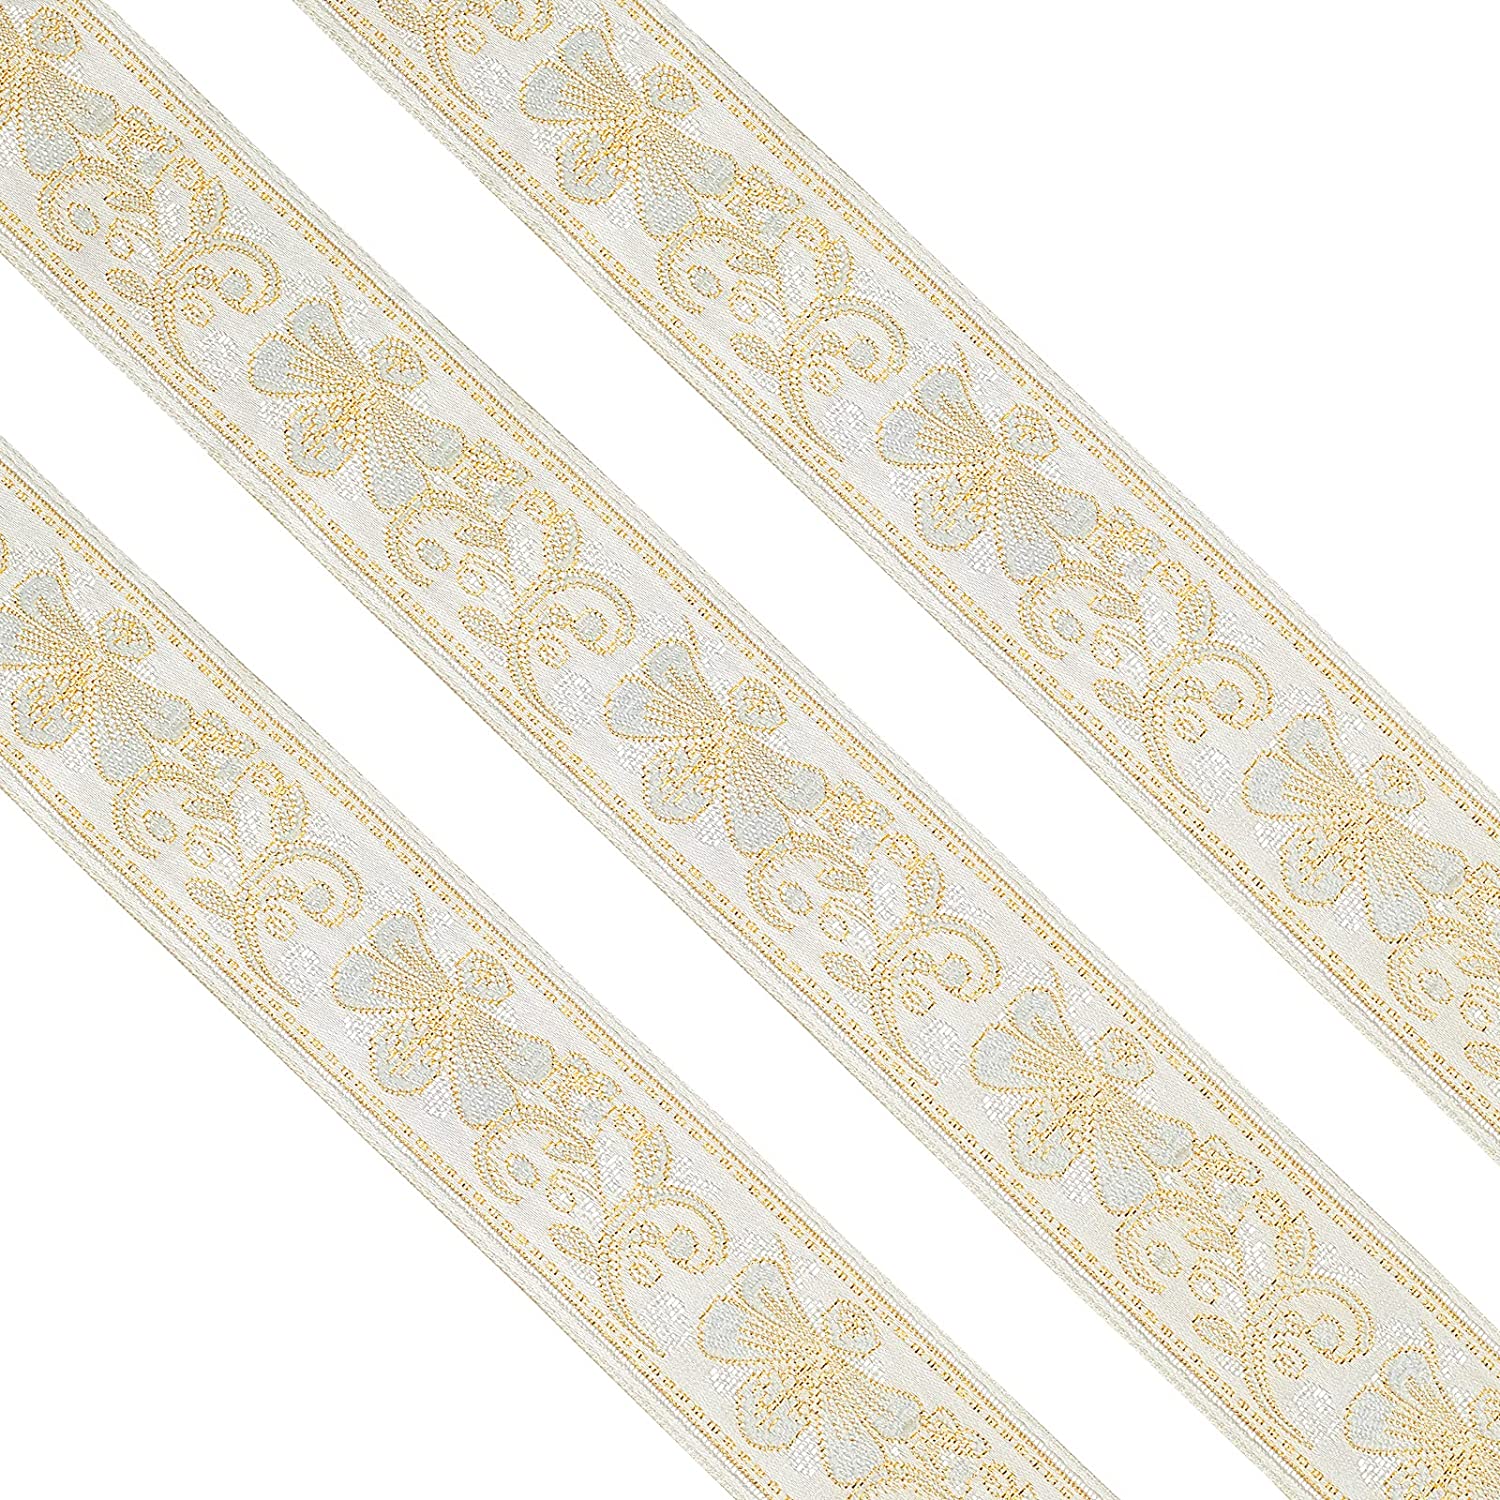 10 Yard Vintage Jacquard Ribbon Gold Jacquard Trim with Embroidery Bee & Floral 33mm Wide Webbing Ribbon Emobridered Woven Trim for DIY Clothing Accessories Decorations